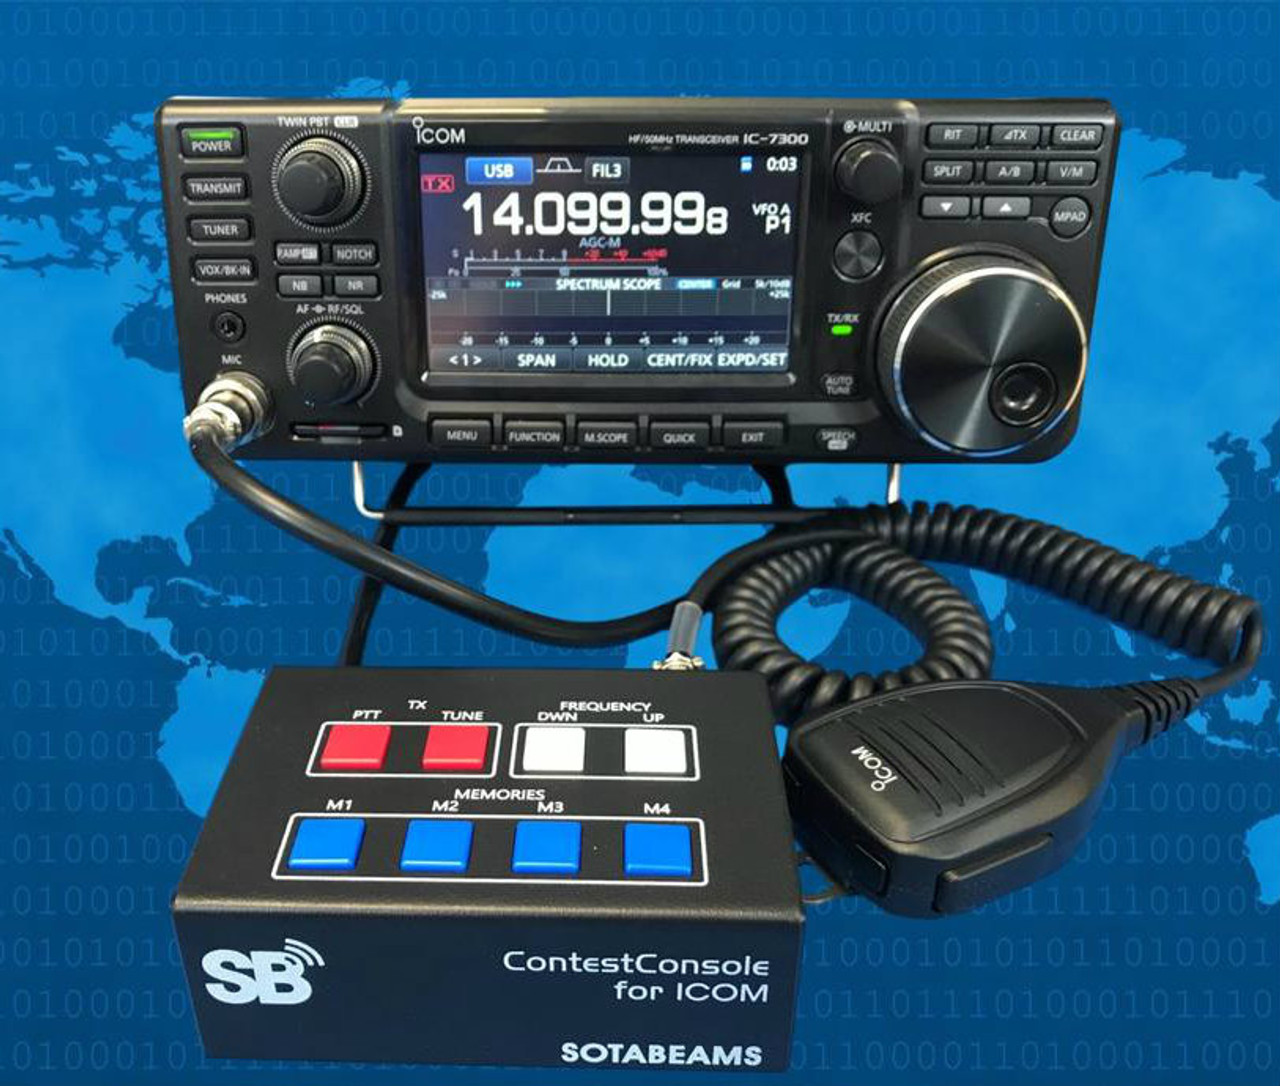 ContestConsole switching unit for ICOM radios picture